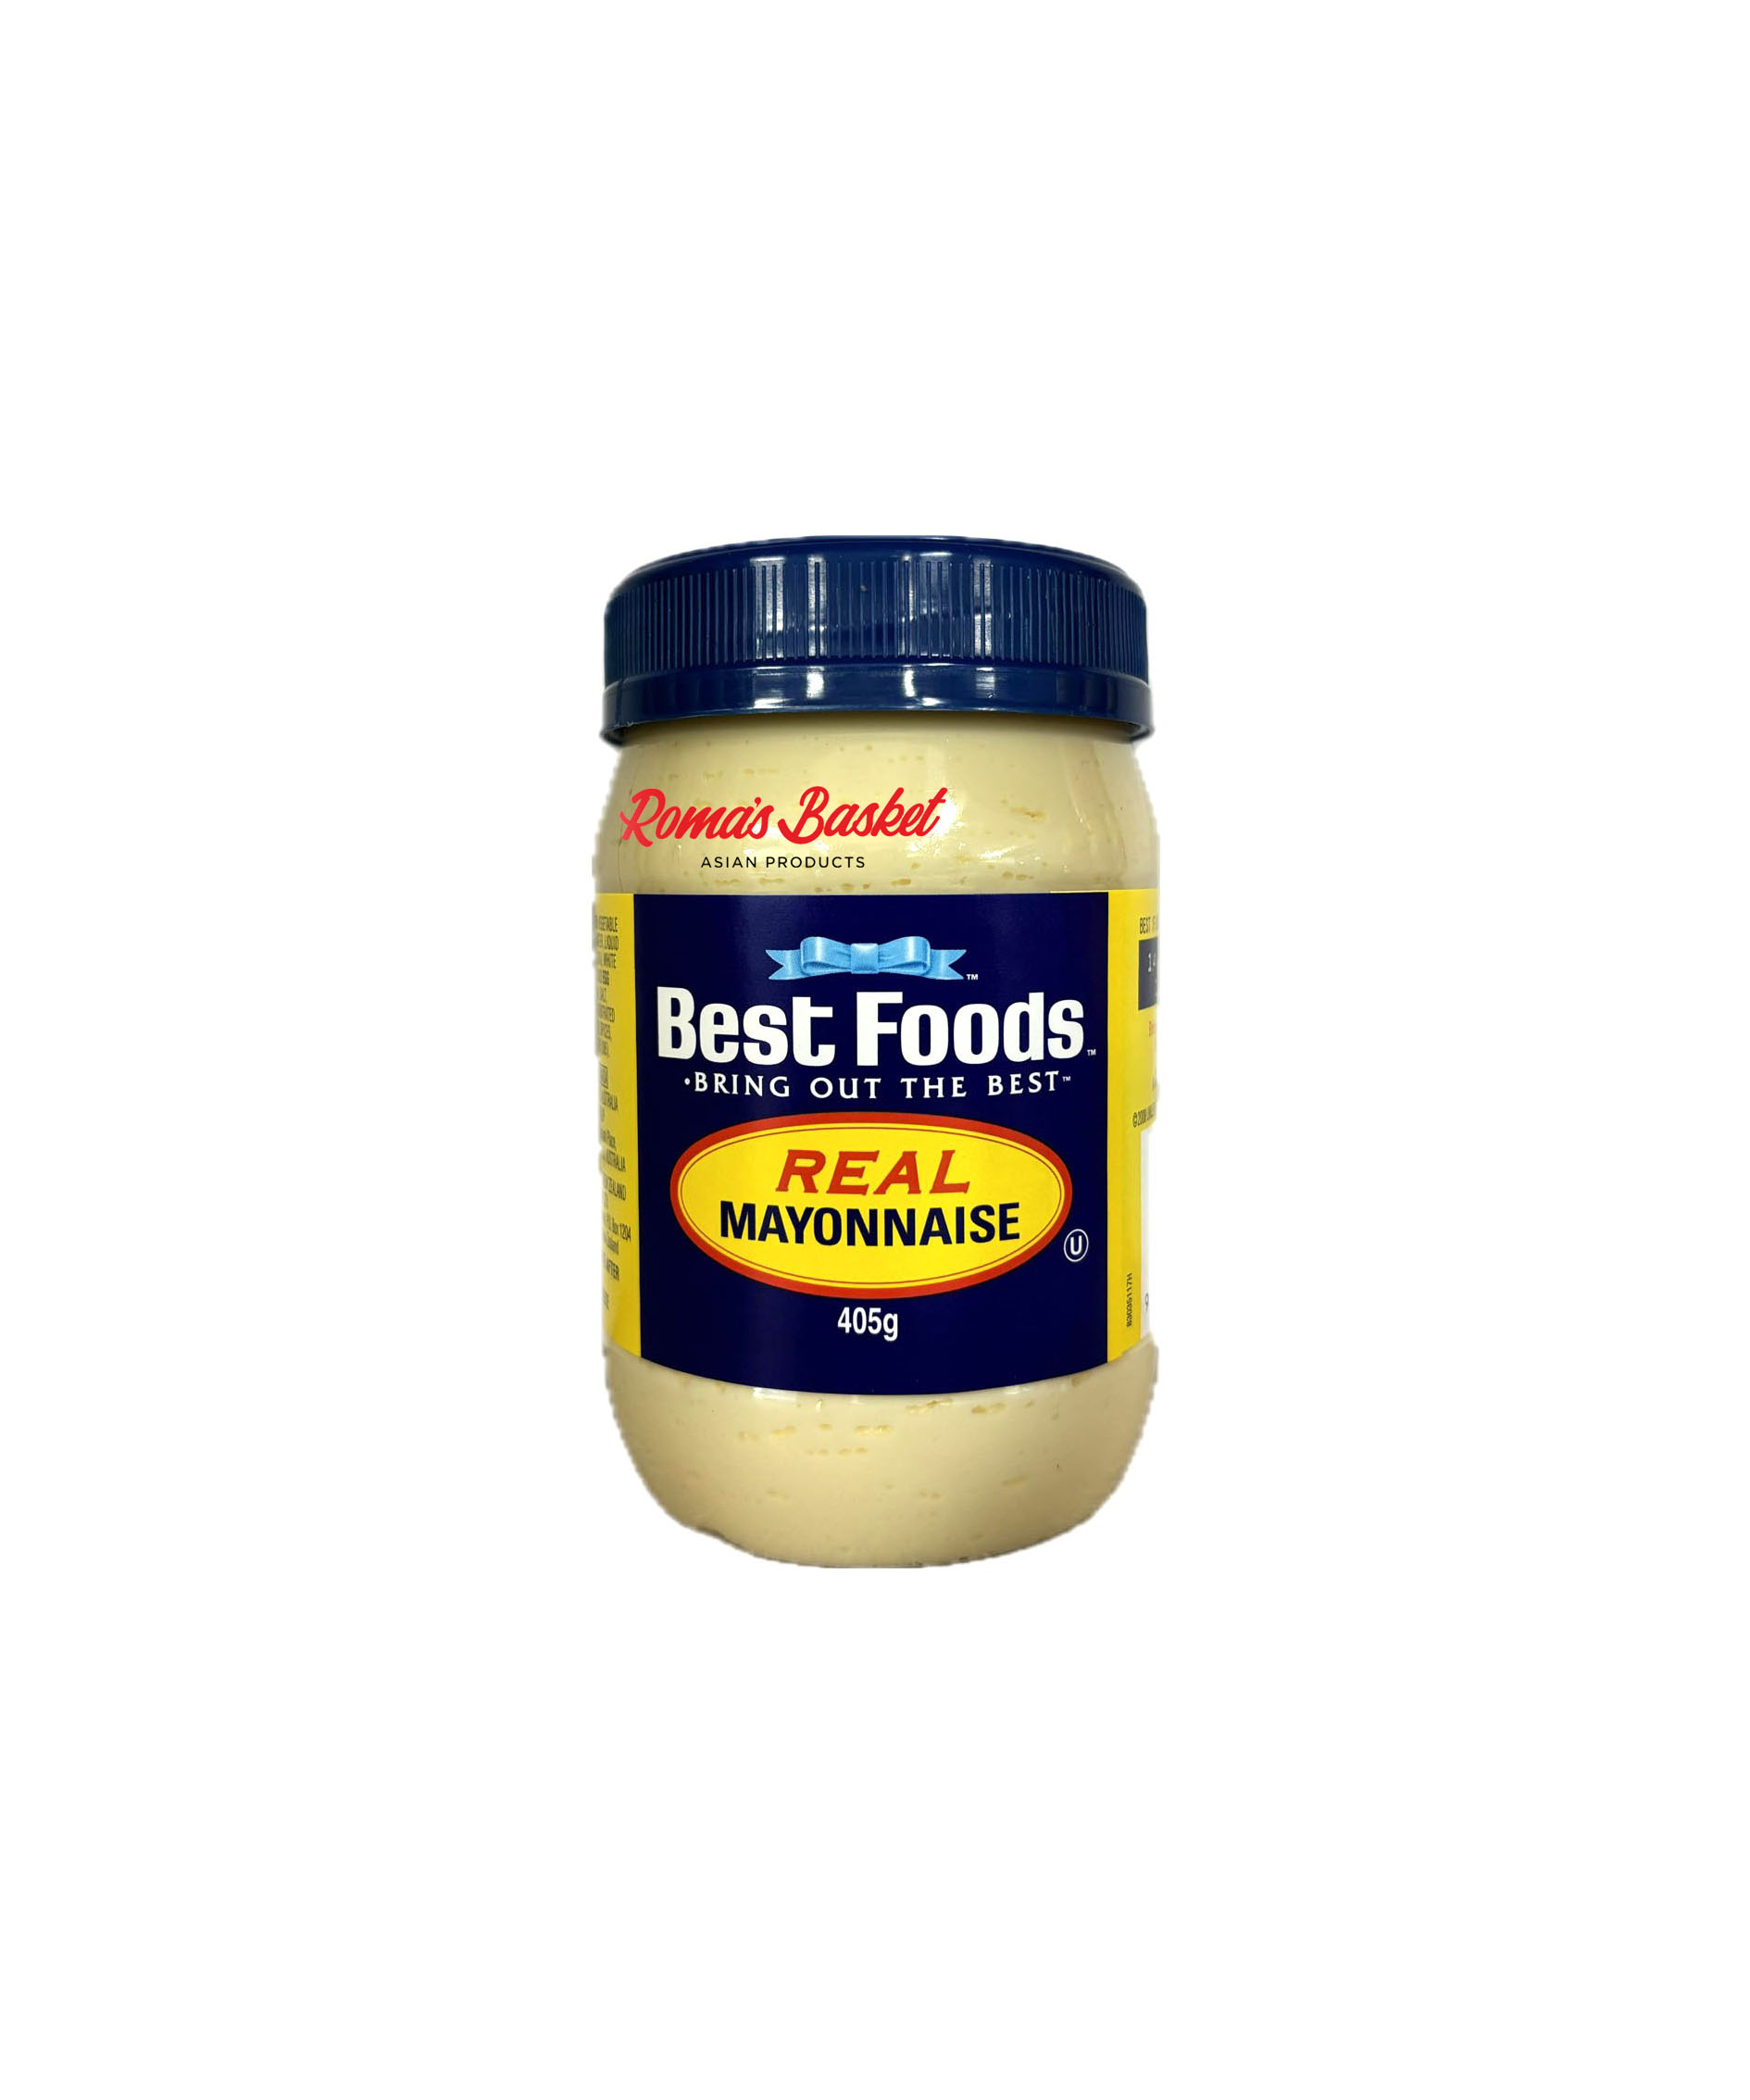 Best Foods Mayonnaise 405g